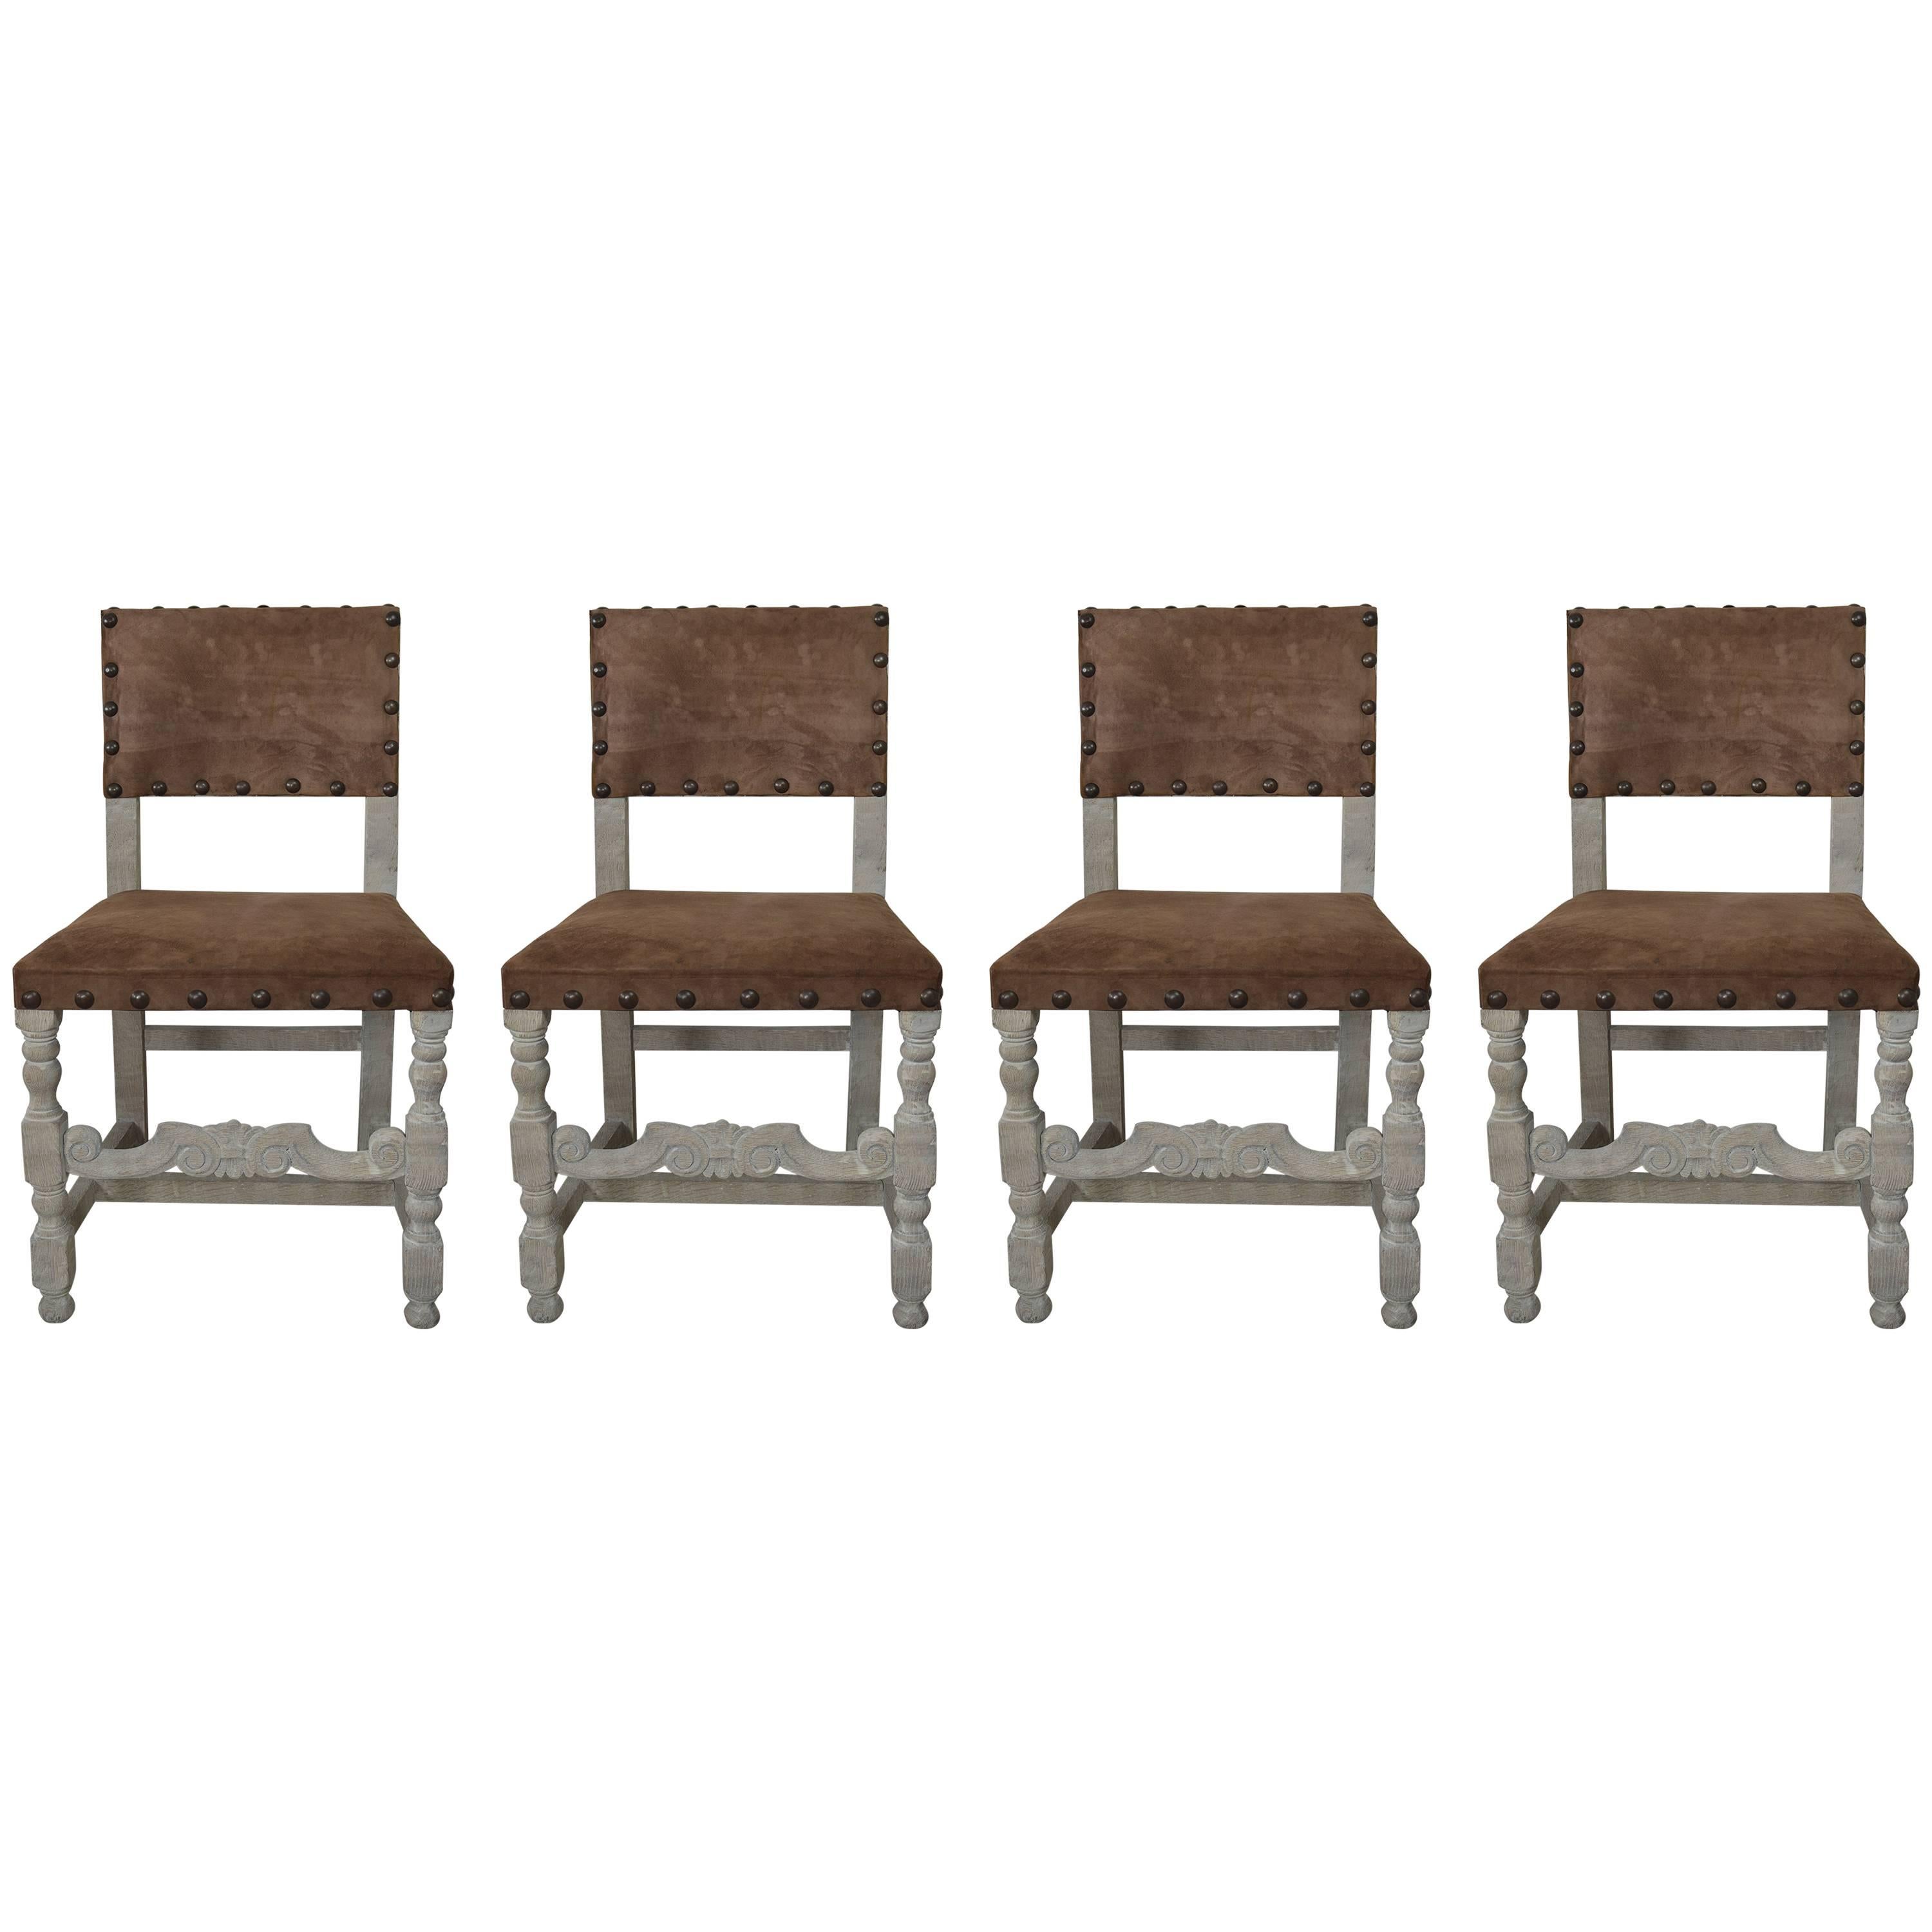 Set of Four Antique 17th Century Style Dining Chairs